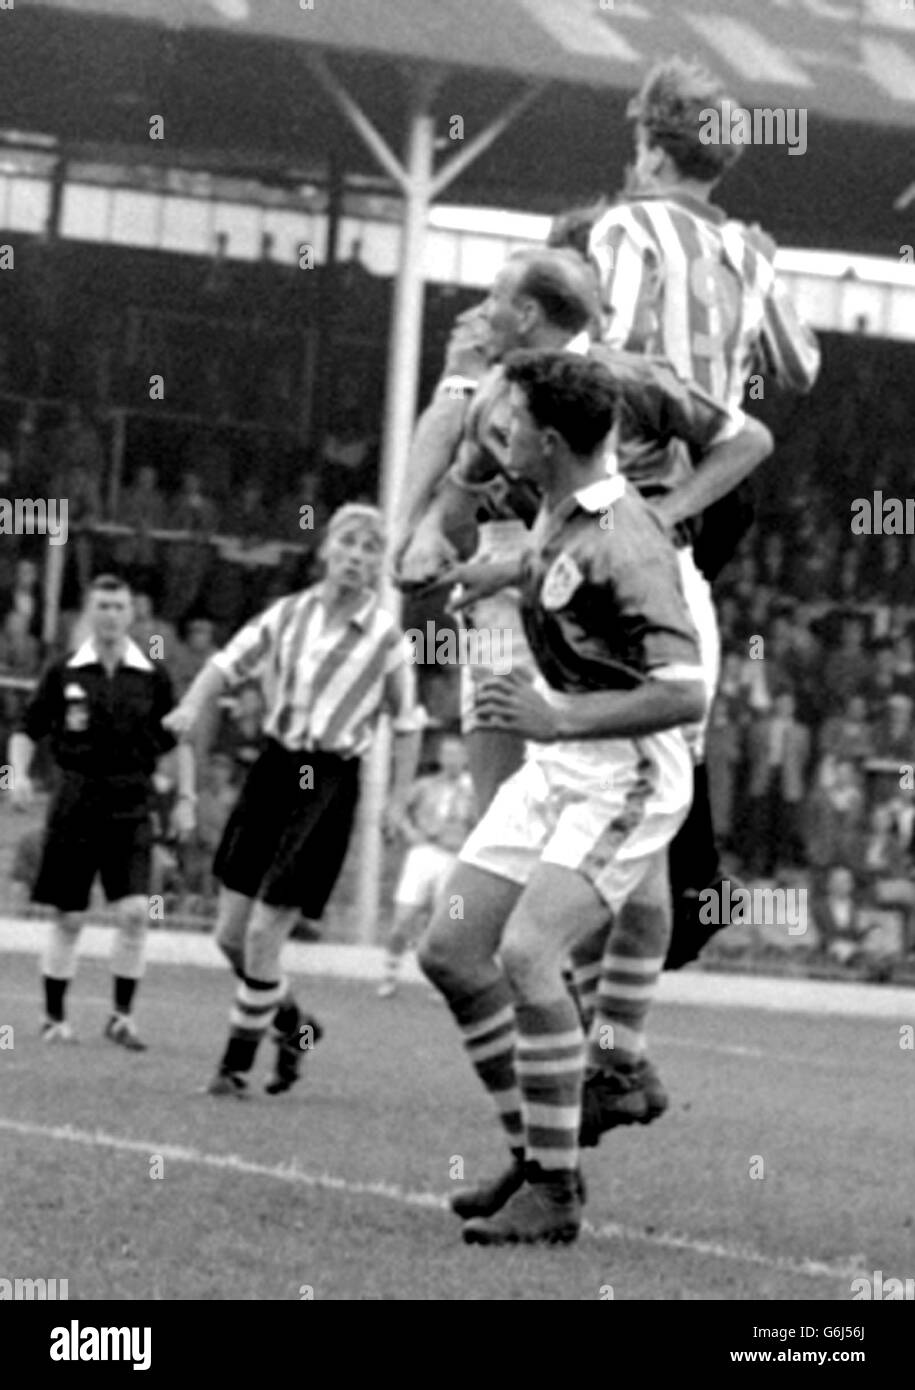 Battle of the heads in the Third Division (South) match between Brentford and Millwall at Griffin Park, Brentford. From camera are Millwall centre-half Hurley; Millwall right-half Short; and (in stripes) Taylor, Brentford centre-forward. Stock Photo